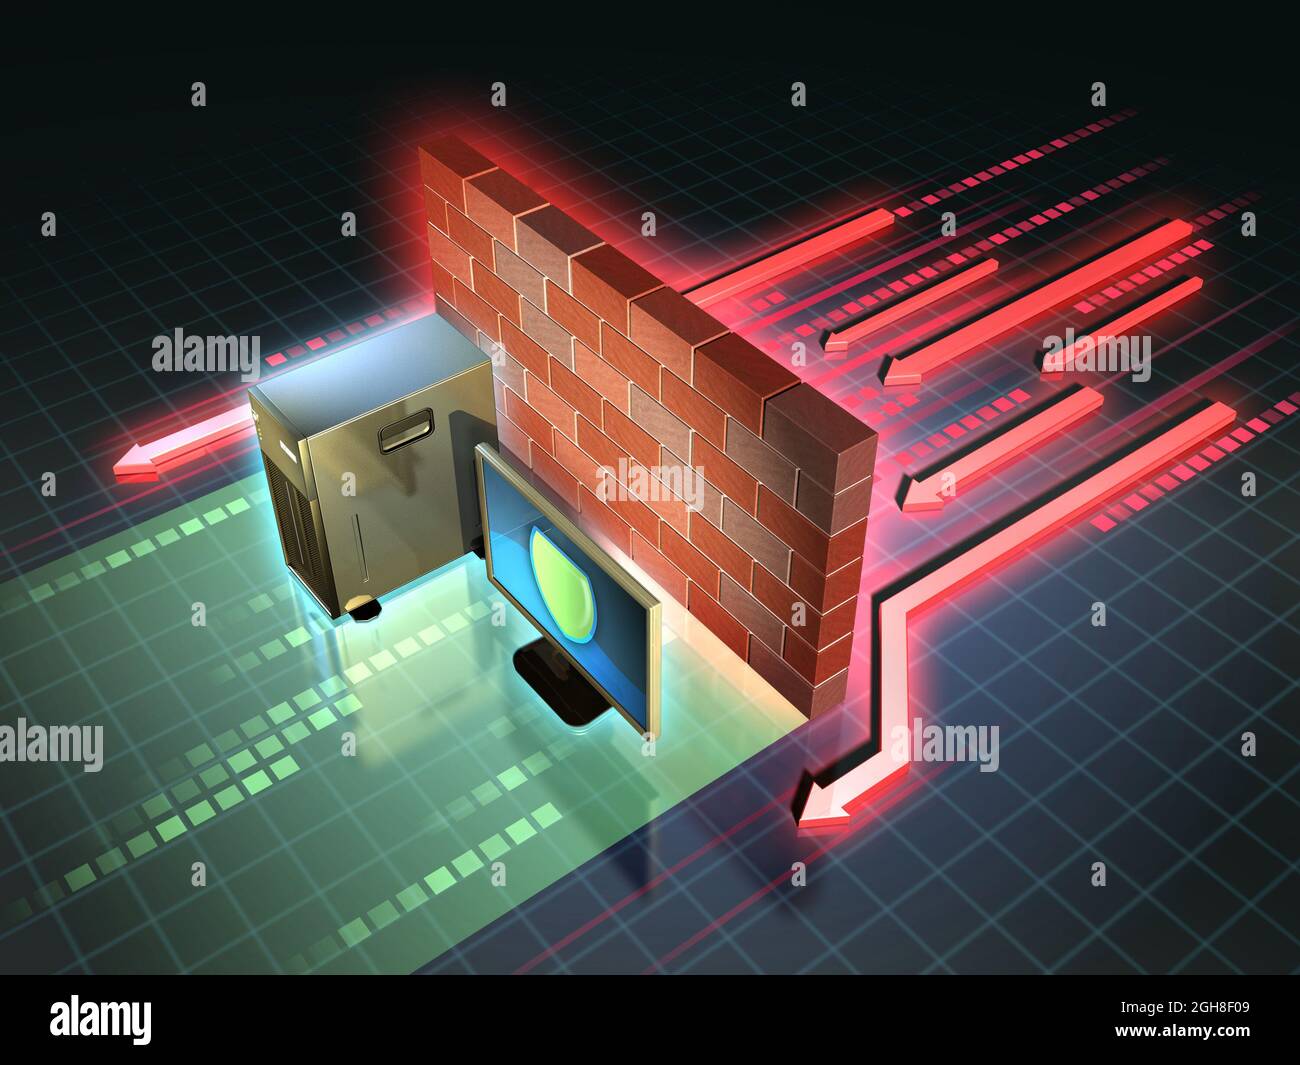 Firewall creates a safe zone for a workstation. 3D illustration. Stock Photo